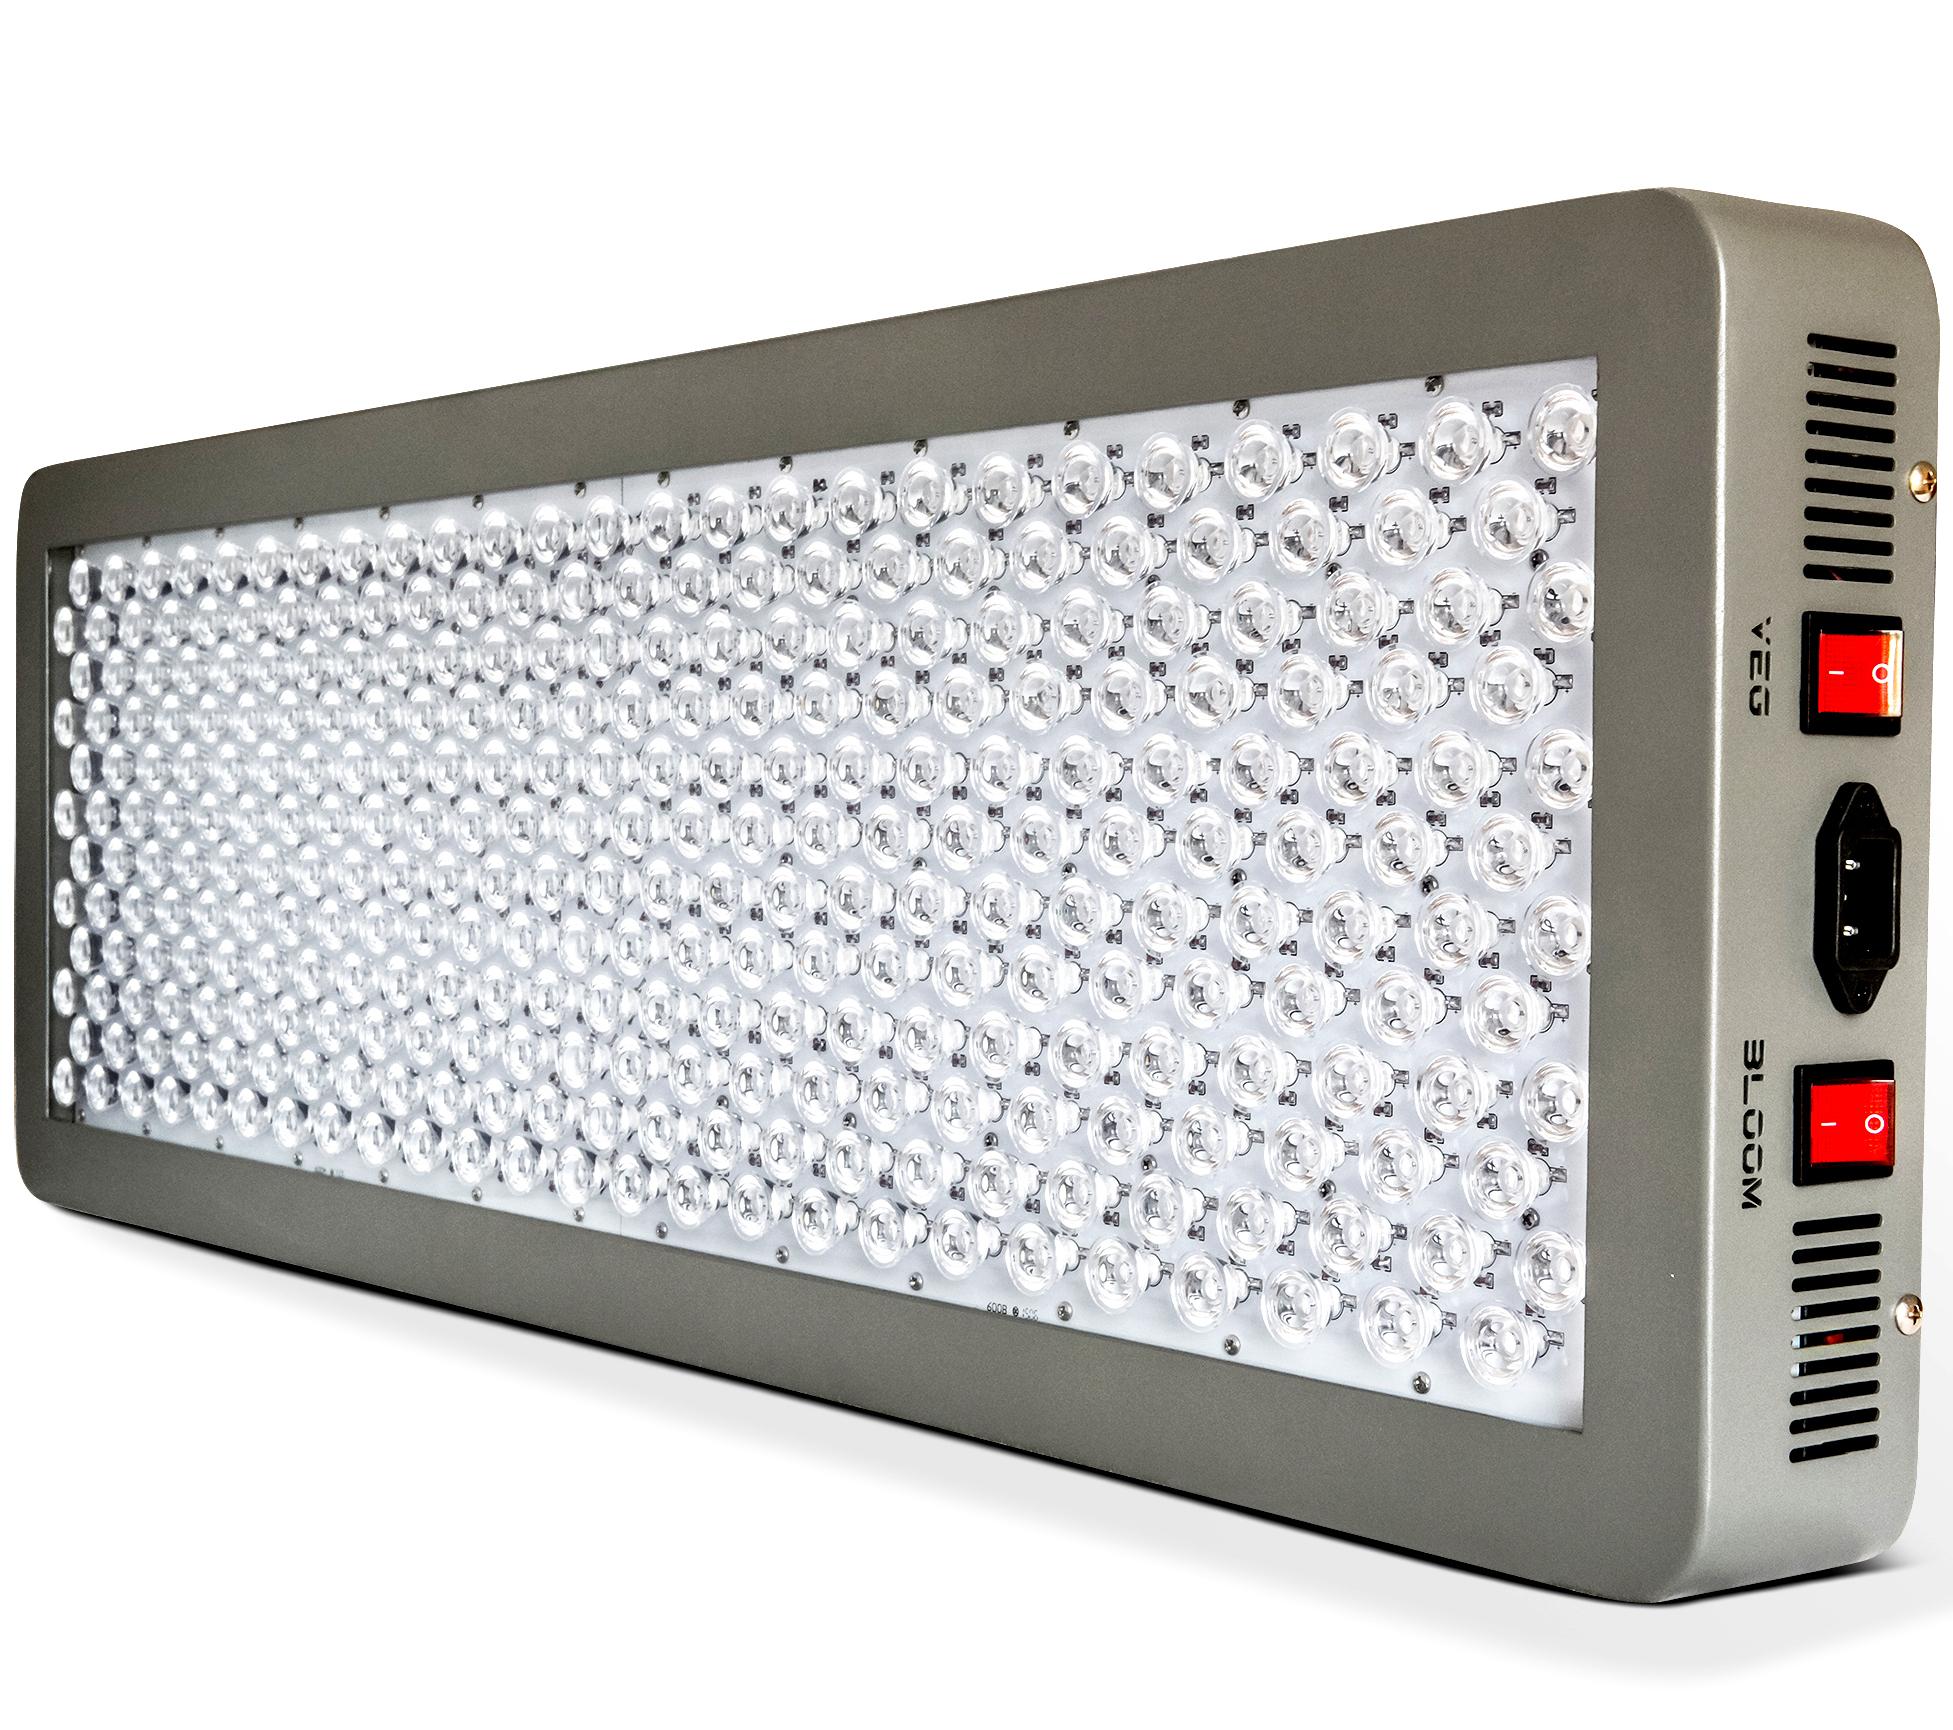 Advanced Platinum Series P900 Led Grow Light Review A Good Choice For Your Plants?